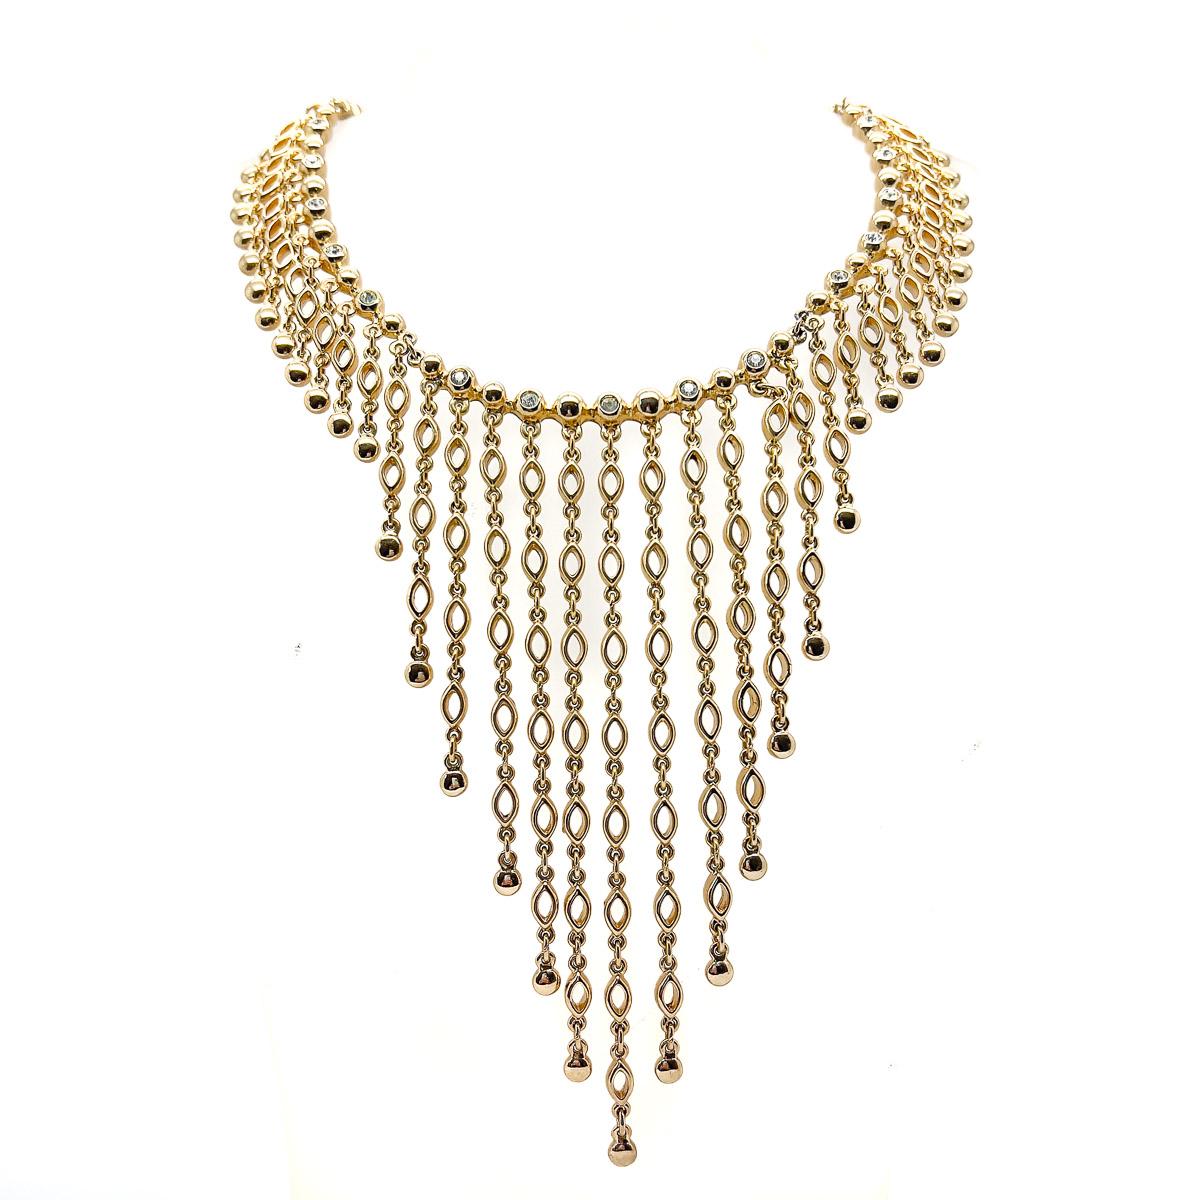 A spectacular and grand Vintage Christian Dior Crystal Cascade Necklace. Drops cascade from the collar to mesmerizingly beautiful effect. The tiny rhinestones adding a hint of sparkle to the lustrous and luxurious gold at the neckline. The drop